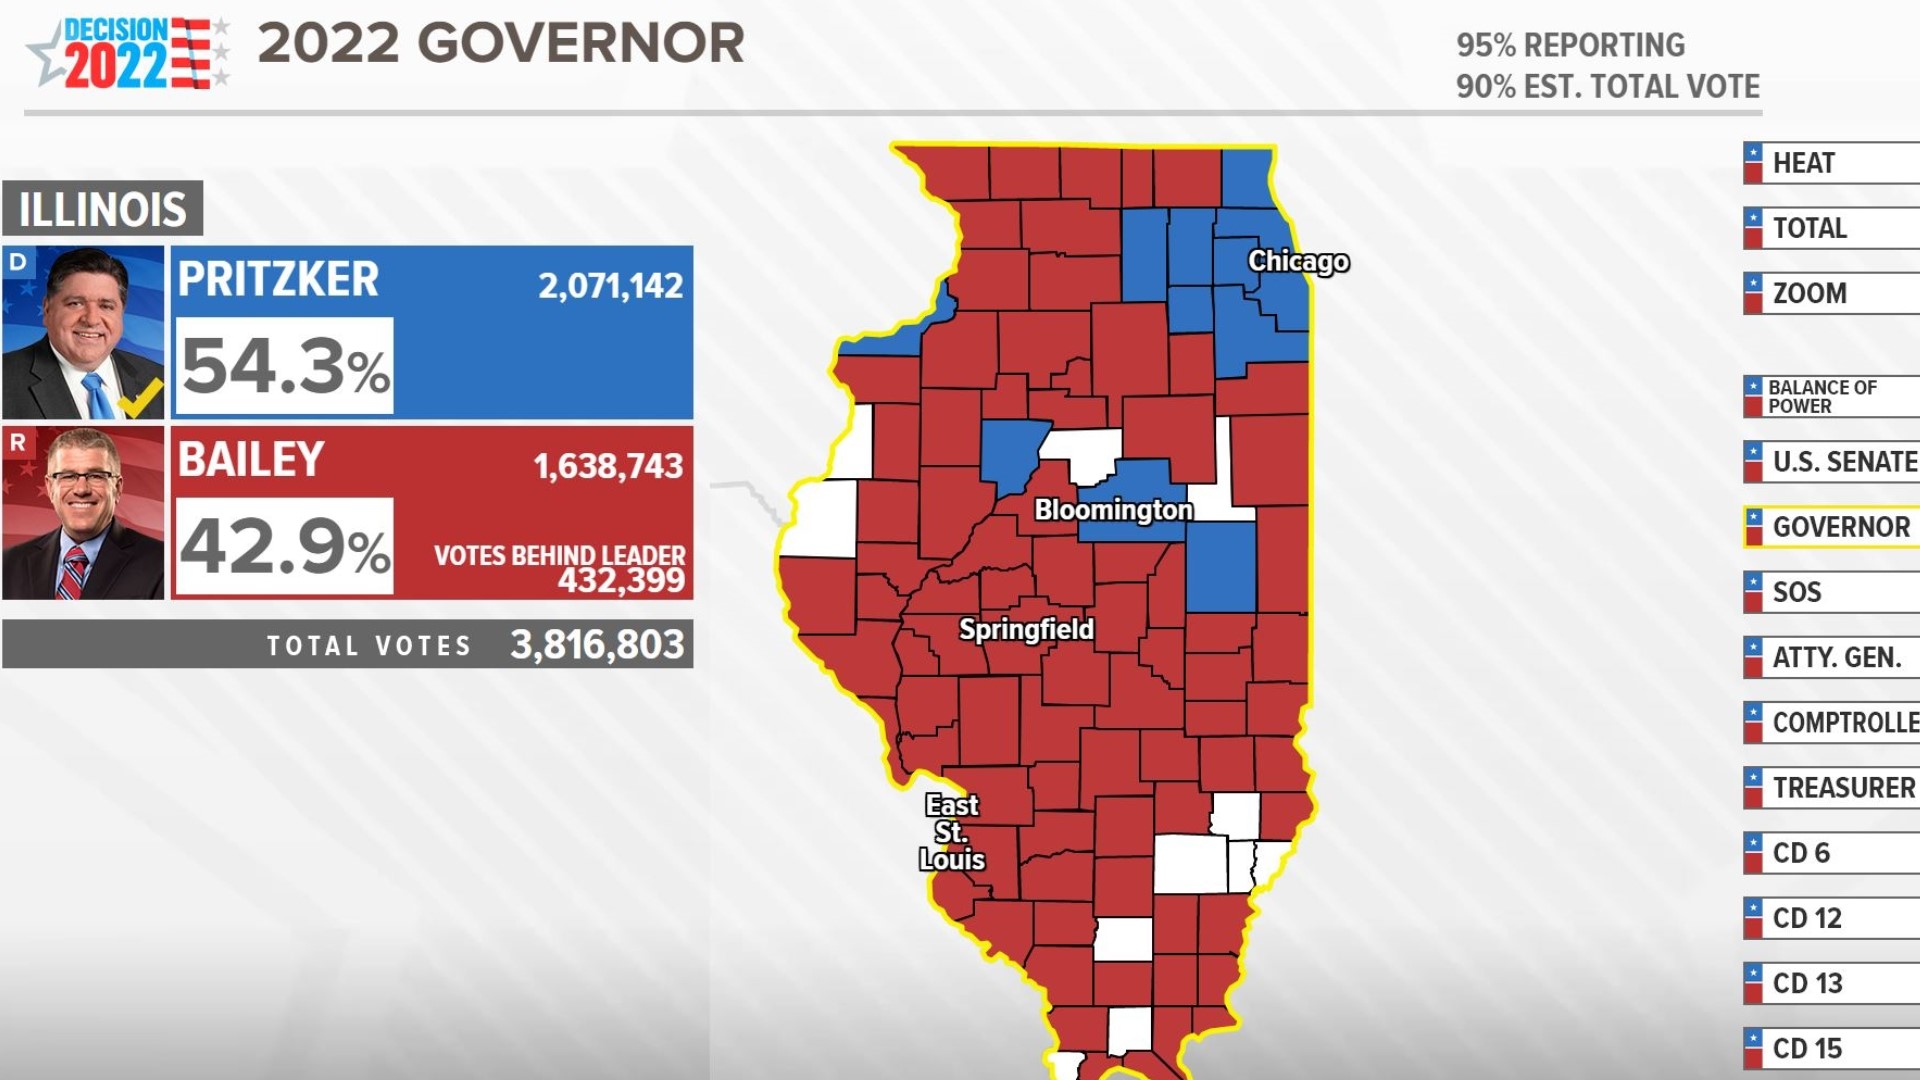 So, you may be wondering how people voted across the state. Well, 5 On Your Side has a county-by-county breakdown in the map below.